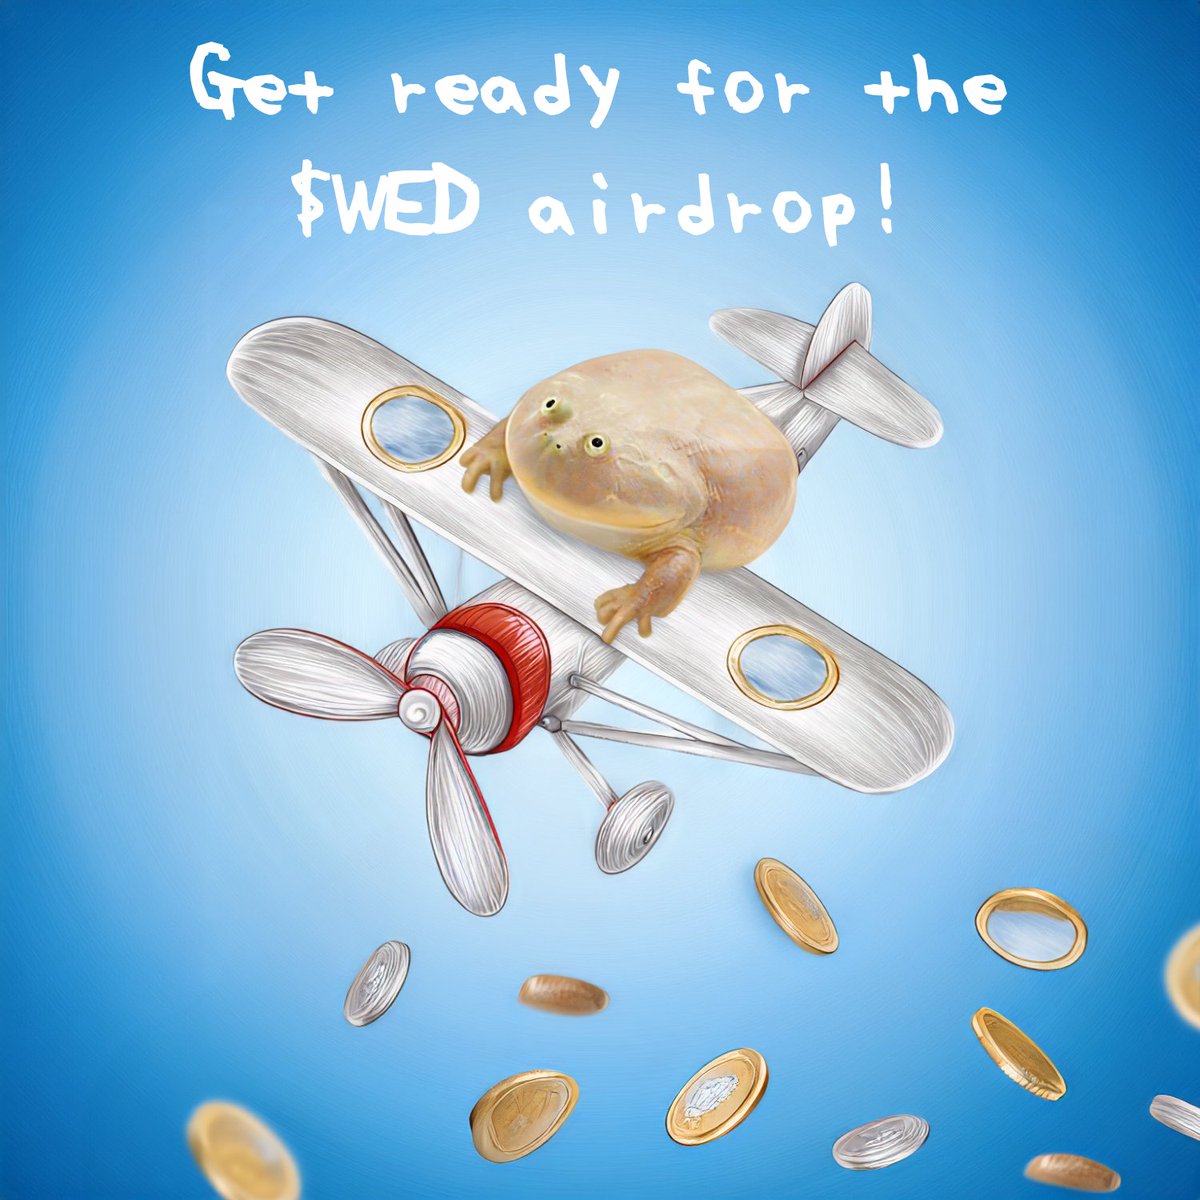 Join our #Telegram, to participate in the $WED airdrop. The first 100 people will receive 10,000 tokens, the first 1,000 people will receive 1,000 tokens. 

t.me/coinWednesday

#crypto #memecoins #MemeCoinSeason #Bullrun2024 #Bullish #Tokens